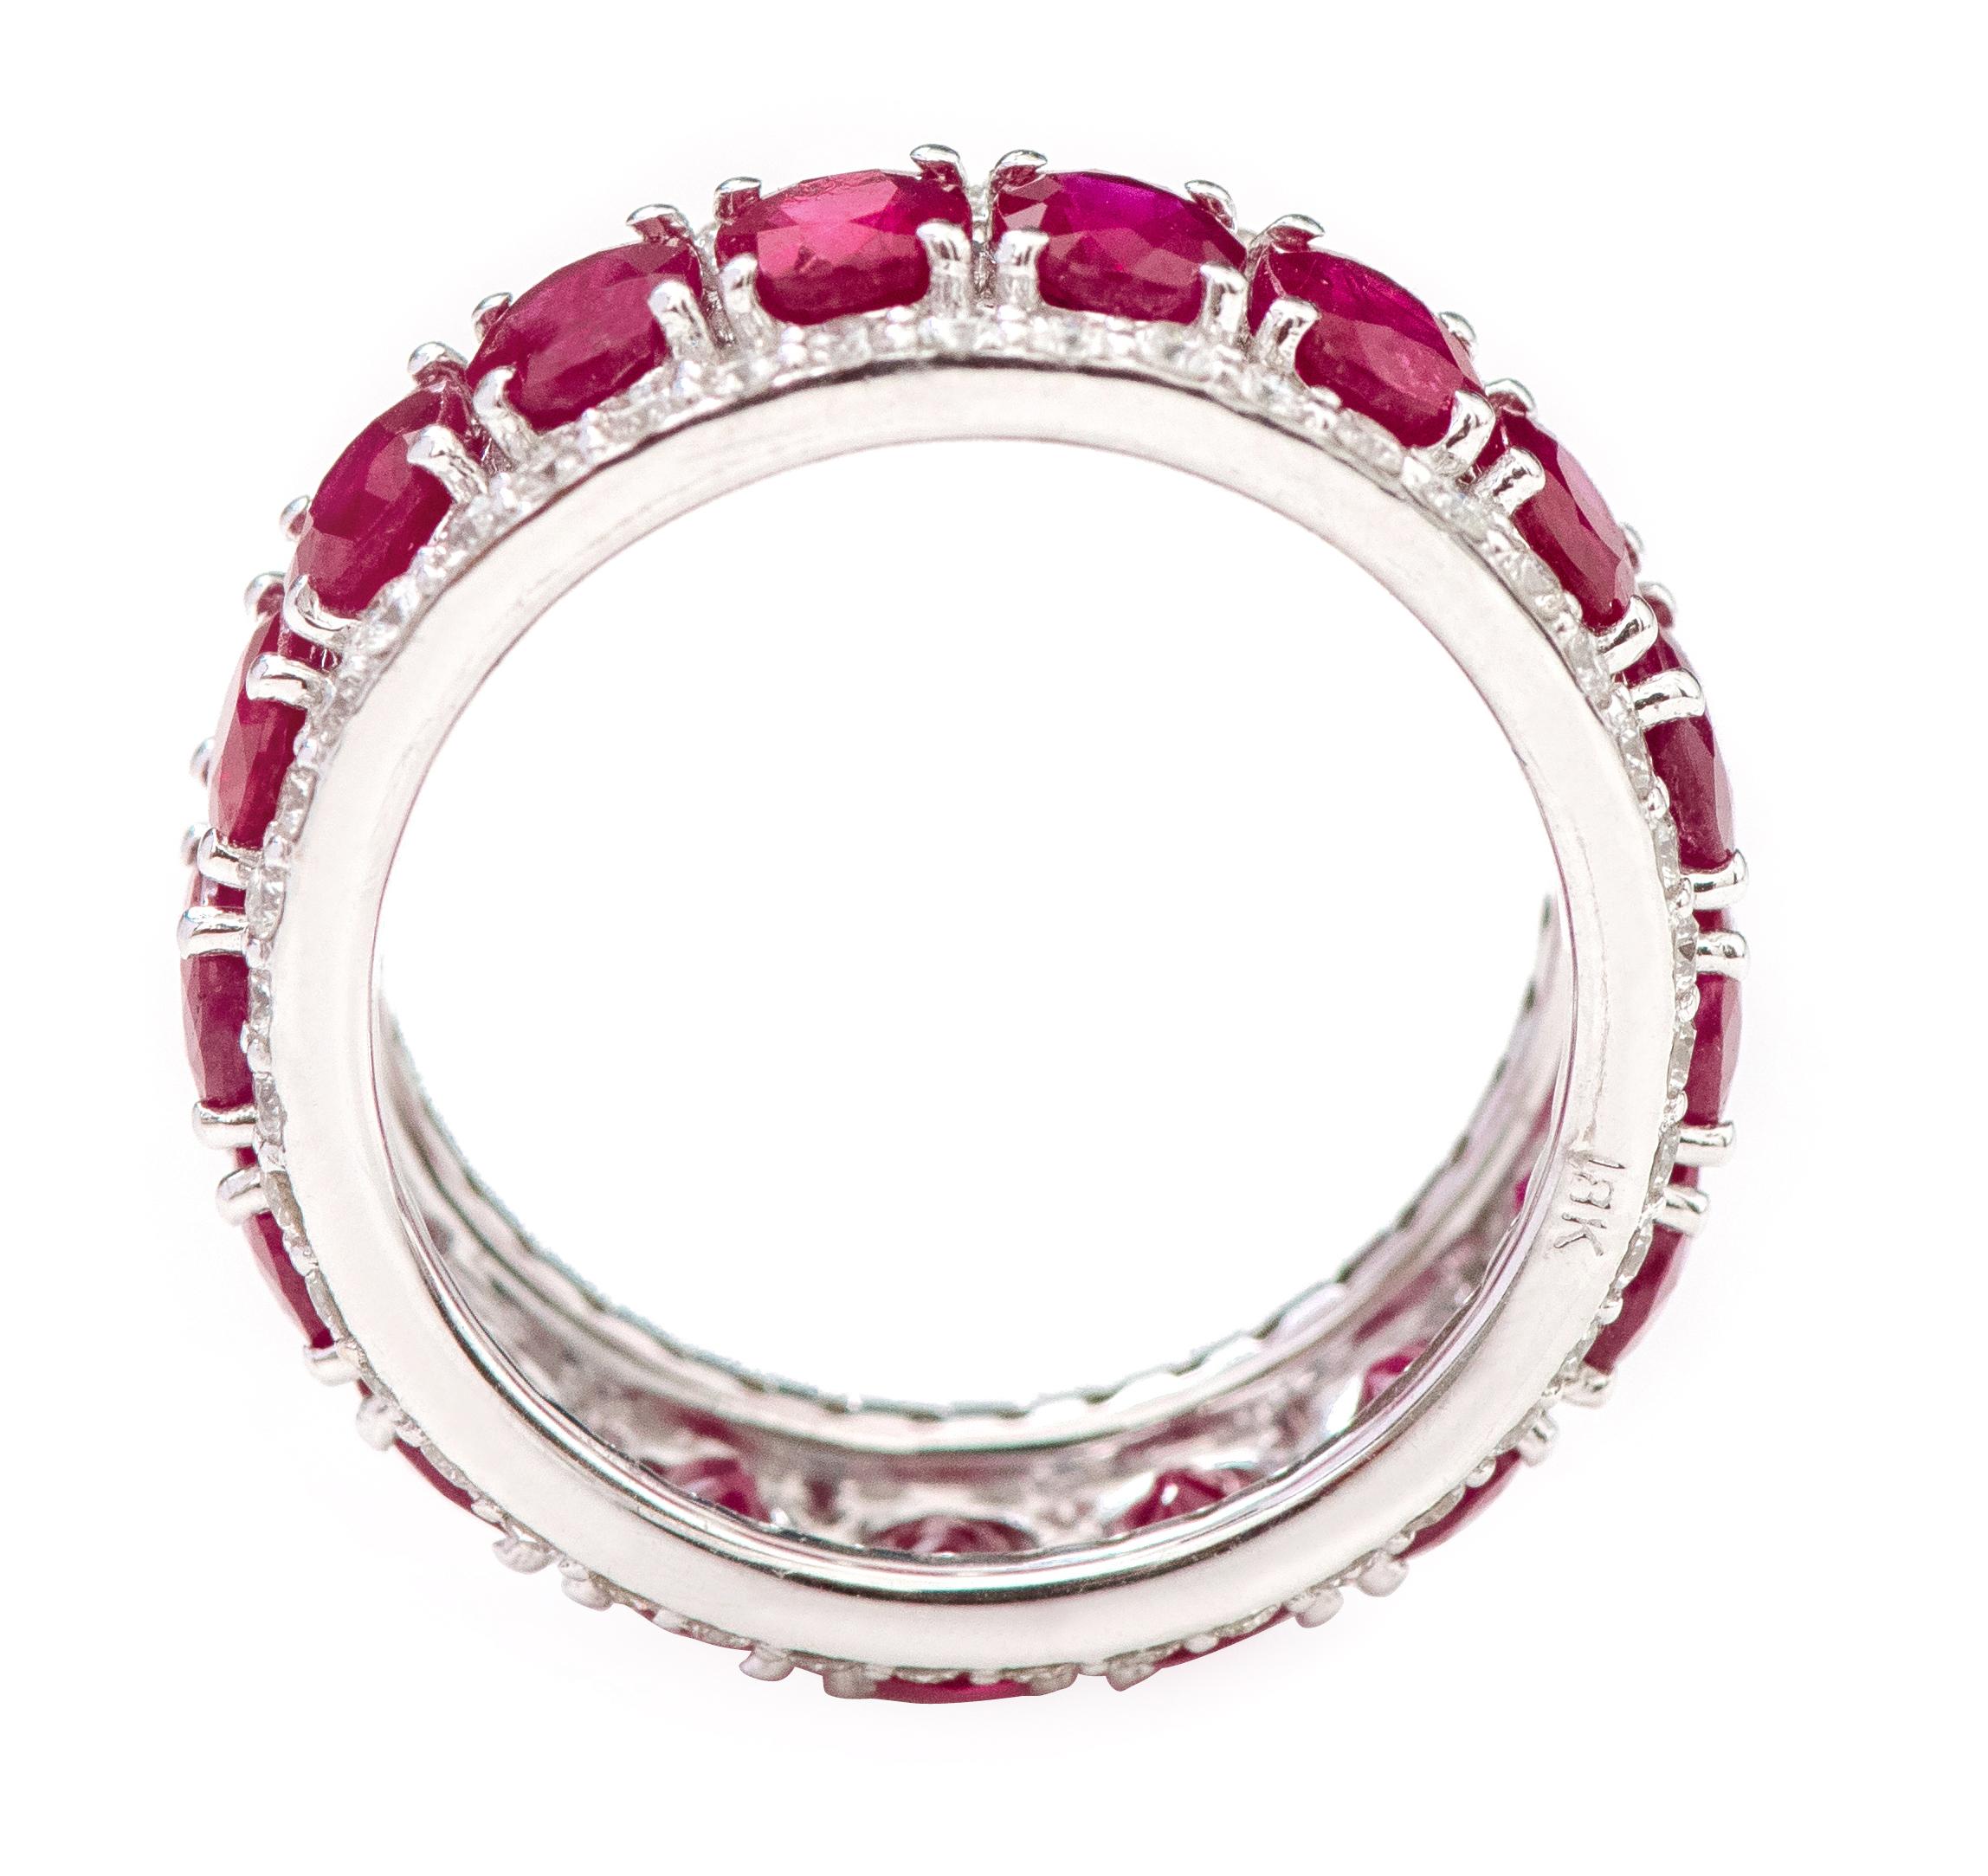 Women's 18 Karat White Gold 7.02 Carat Oval-Cut Ruby and Diamond Eternity Band Ring For Sale